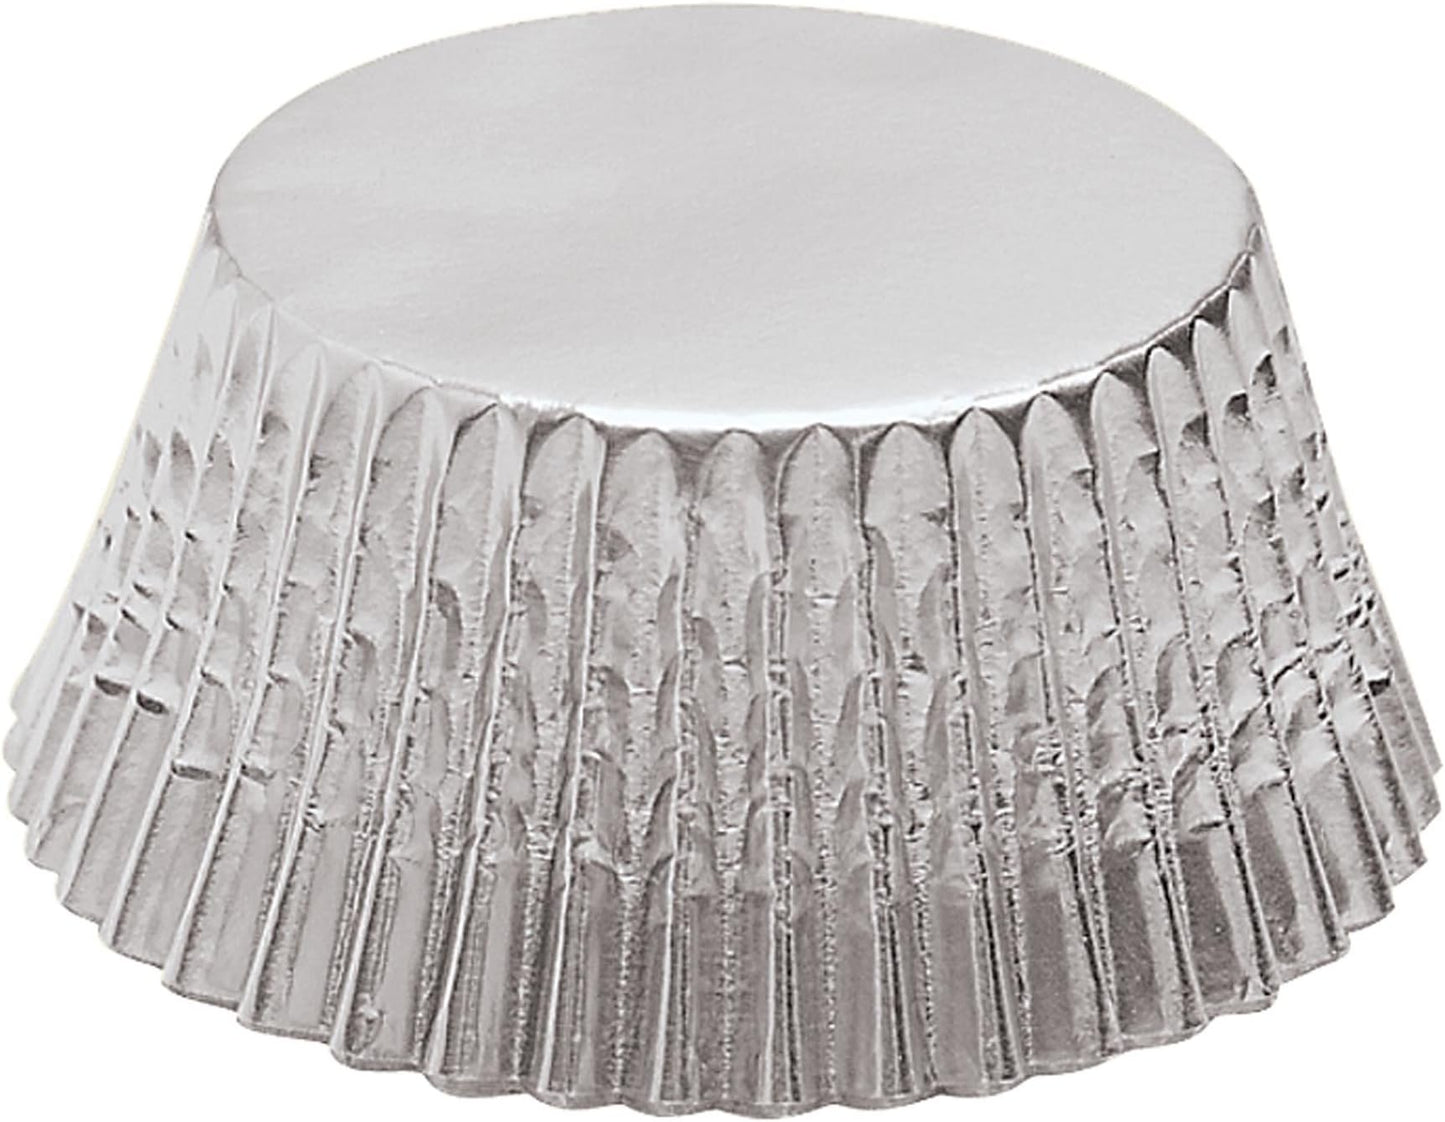 Silver Foil Baking Cups, 32 count